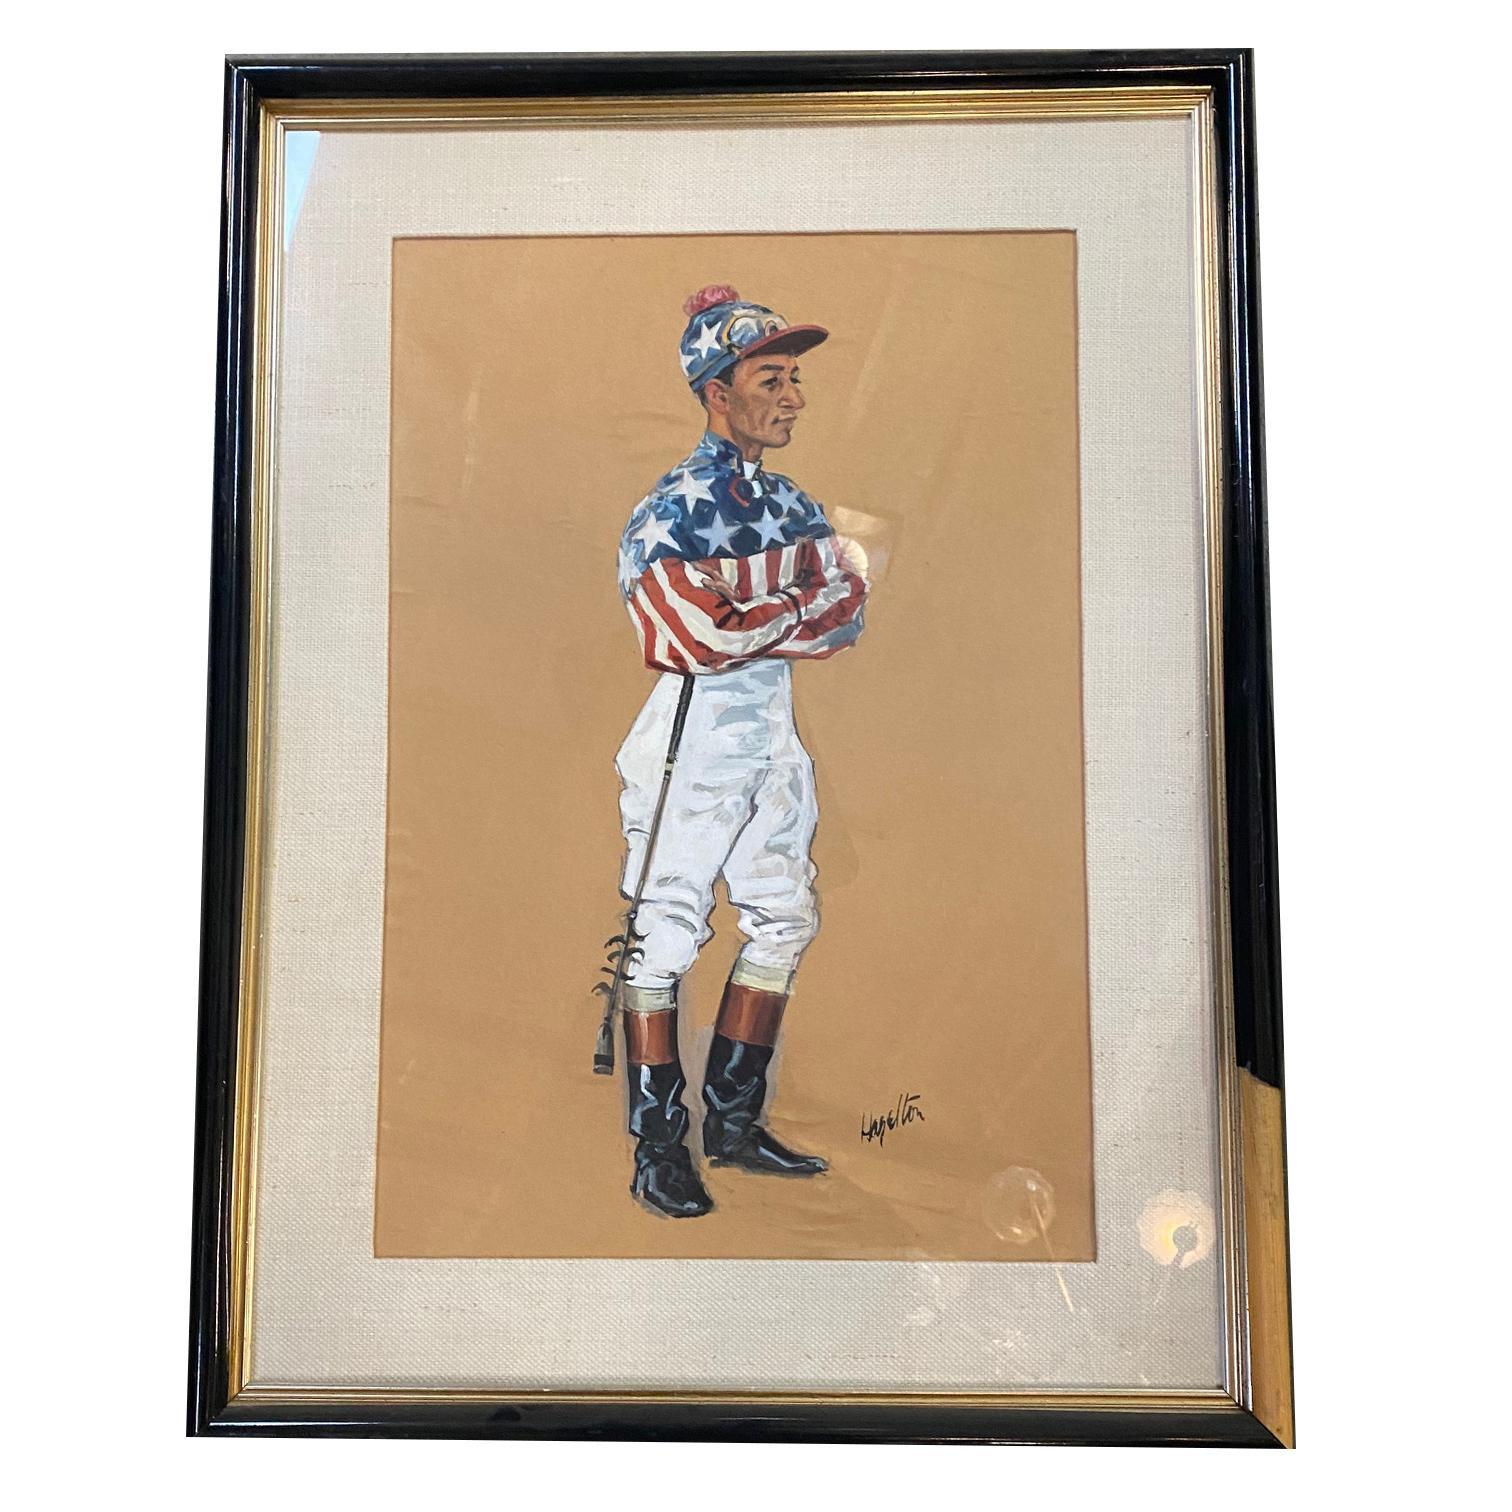 Original pair of midcentury pastels on paper featuring a portrait of period jockey rider. Each is signed by the original artist 